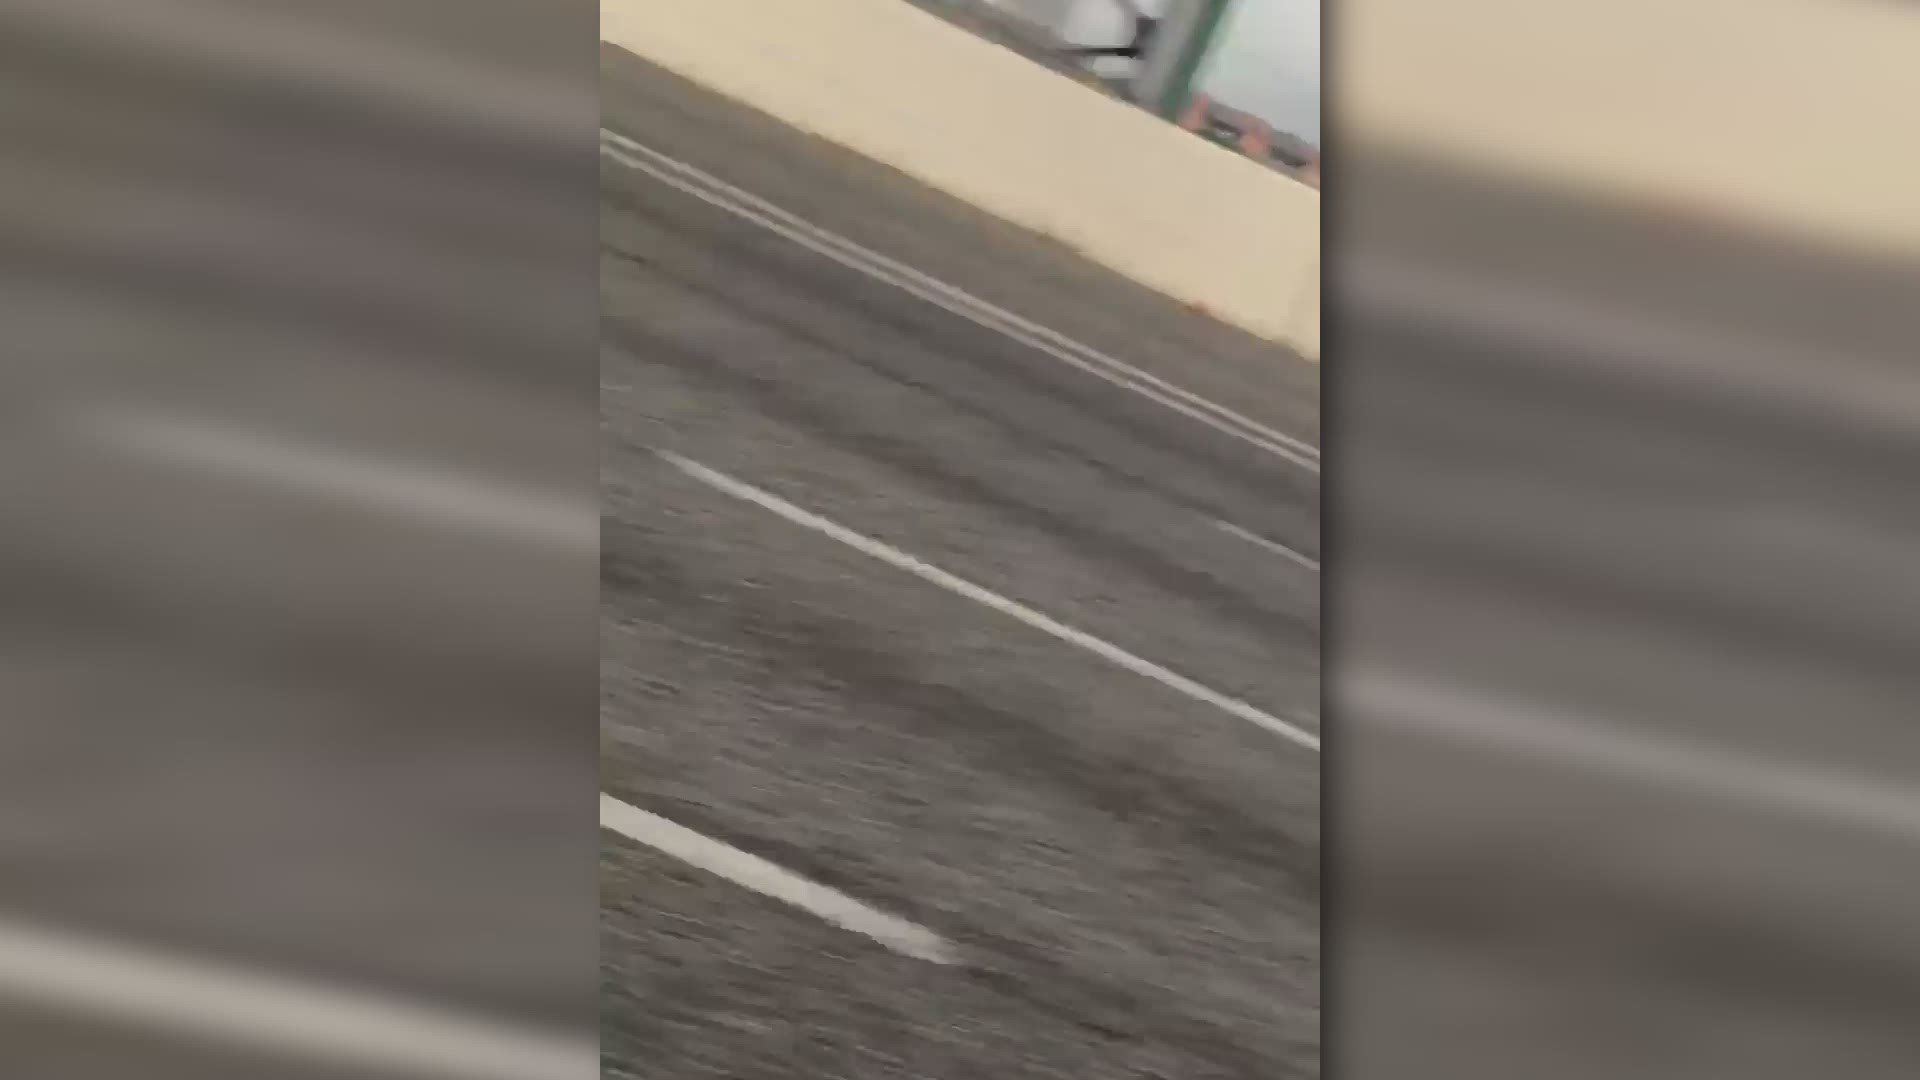 The eyewitness said the person was swerving in and out of traffic with his chest on the bike seat down Loop 410 in San Antonio for at least ten minutes before he decided to take his phone out and document what was happening.